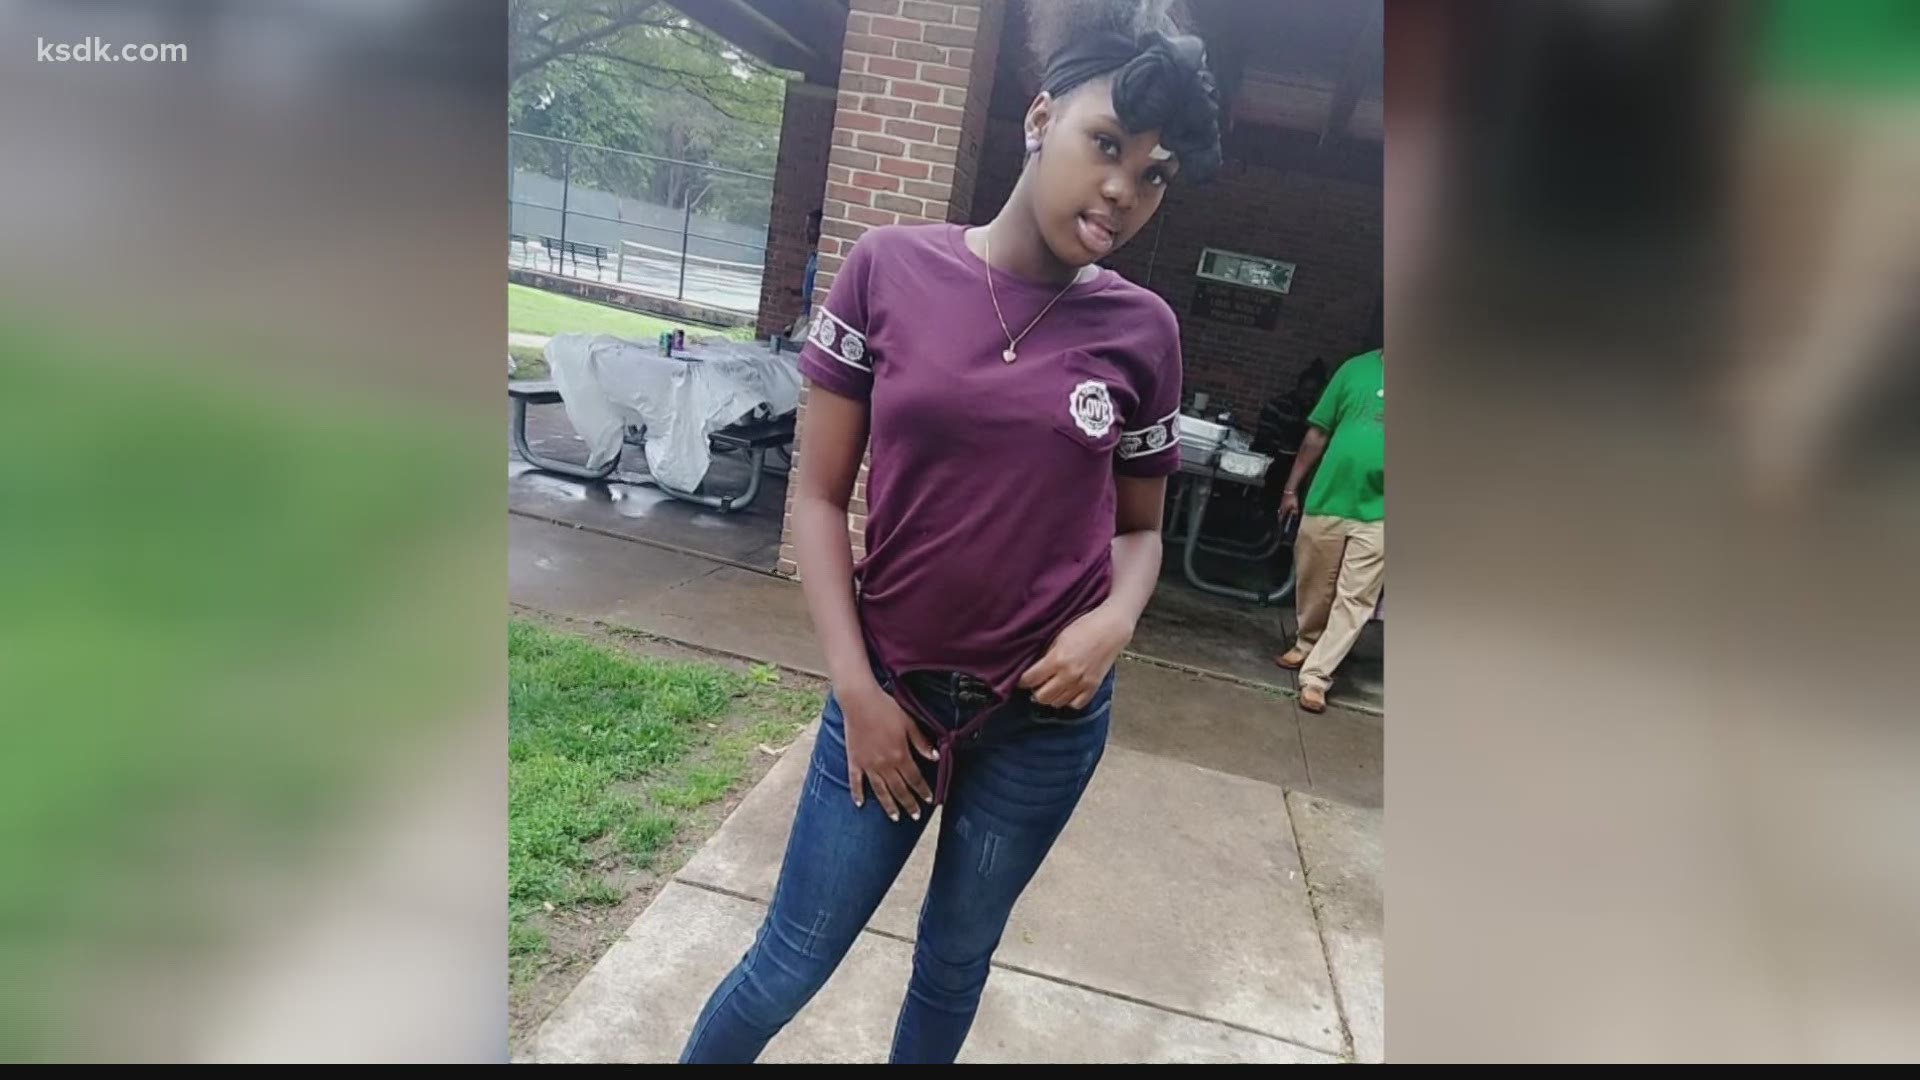 The latest homicide victim is a 15-year-old girl